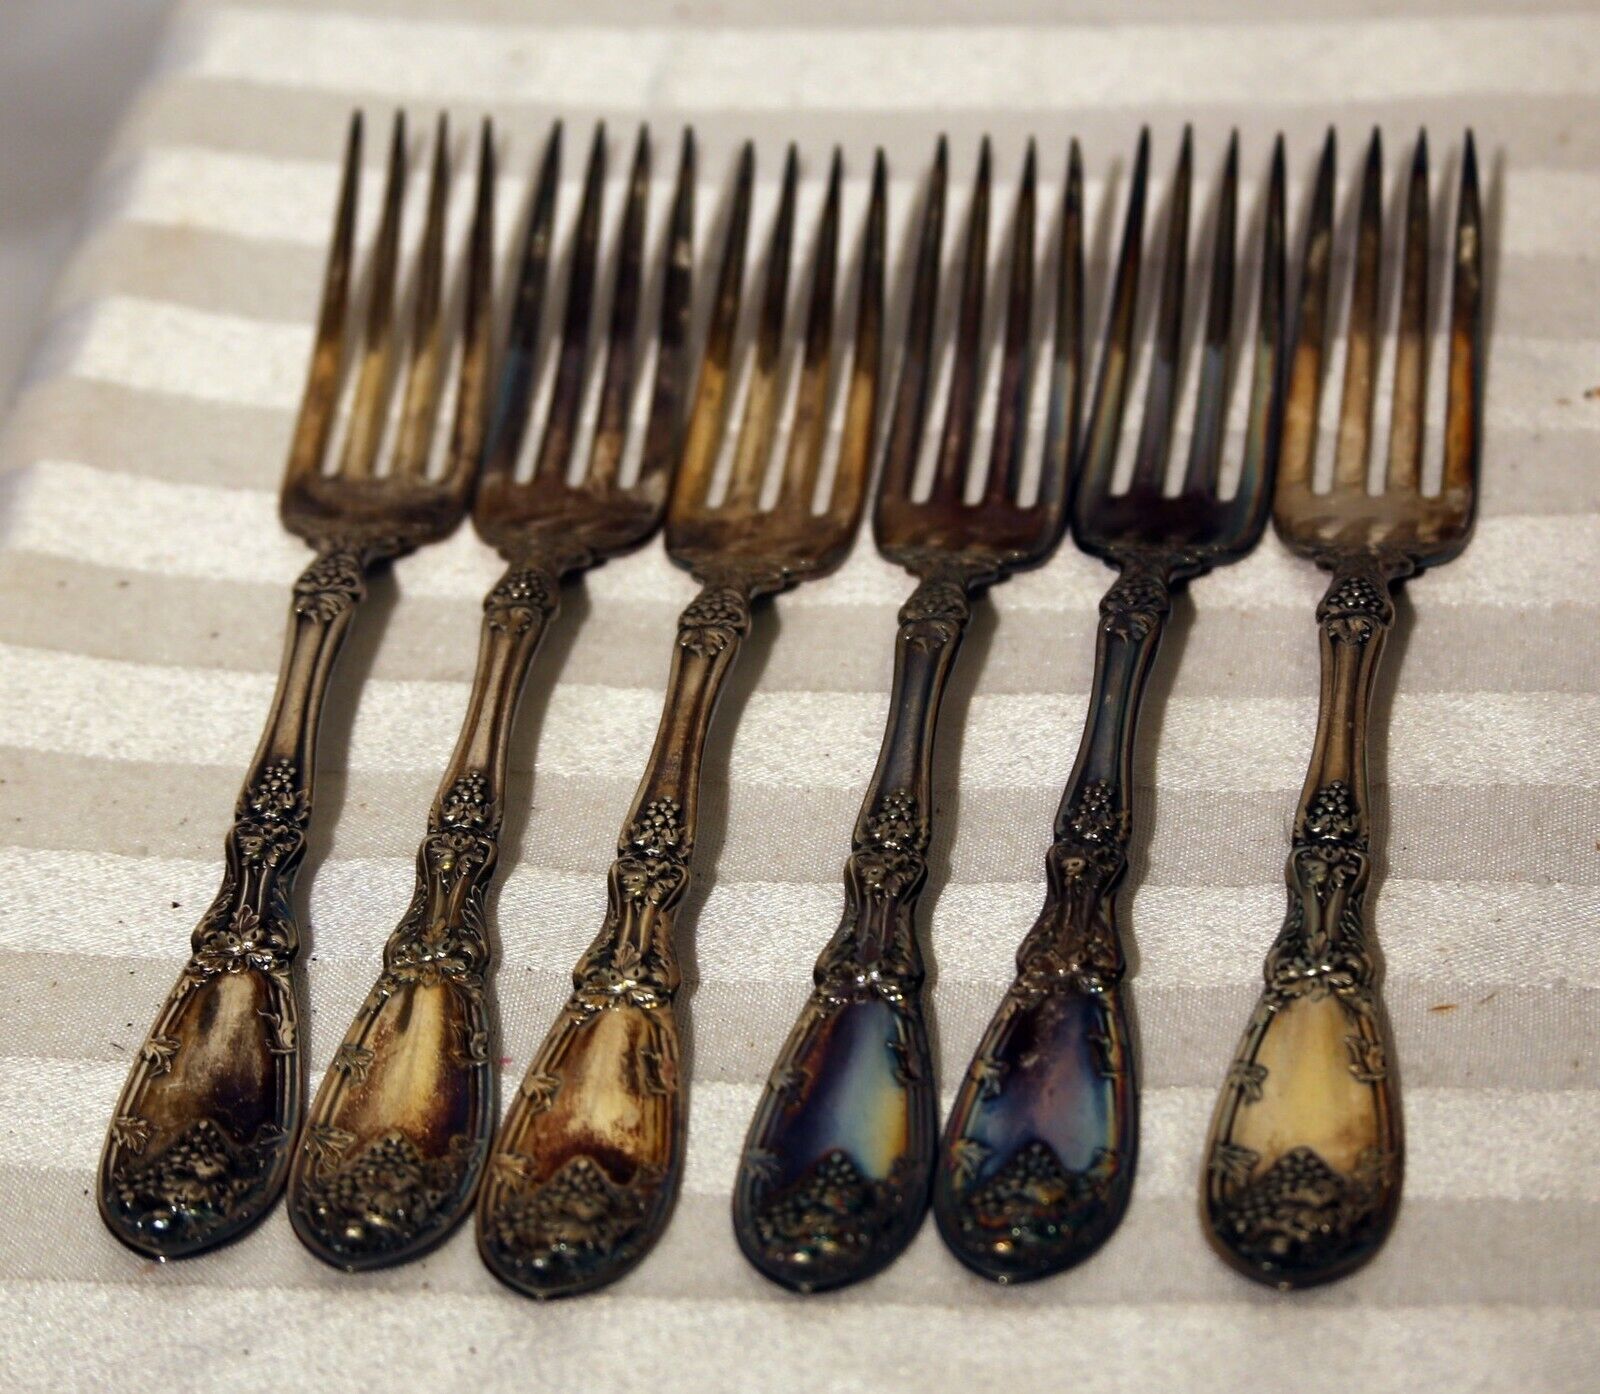 1881 Rogers silverplate forks Bombing free shipping 6 grape inches Max 49% OFF 7.25 design